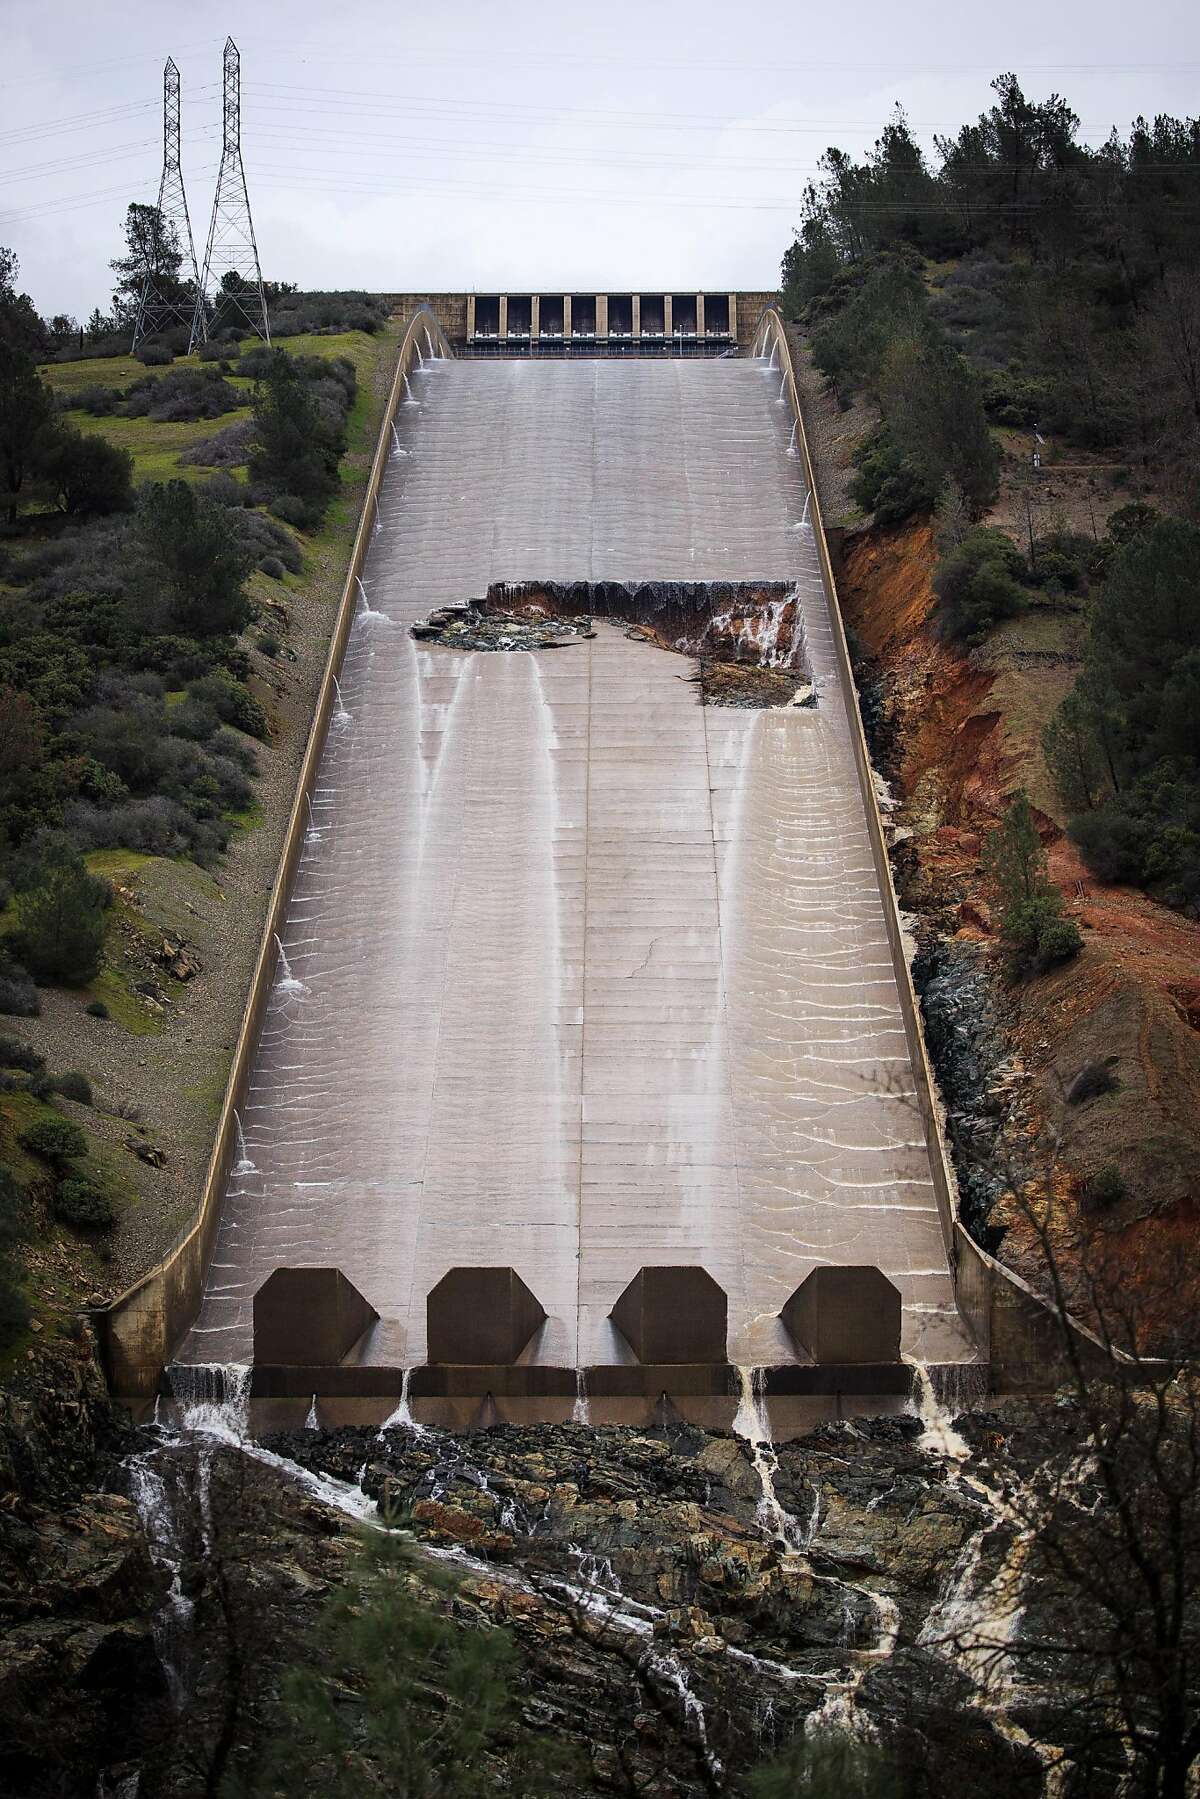 A hole was torn in the spillway of the Oroville Dam while releasing approximately 60,000 cubic-feet-second of water in advance of more rain on February 7, 2017 in Oroville, California.